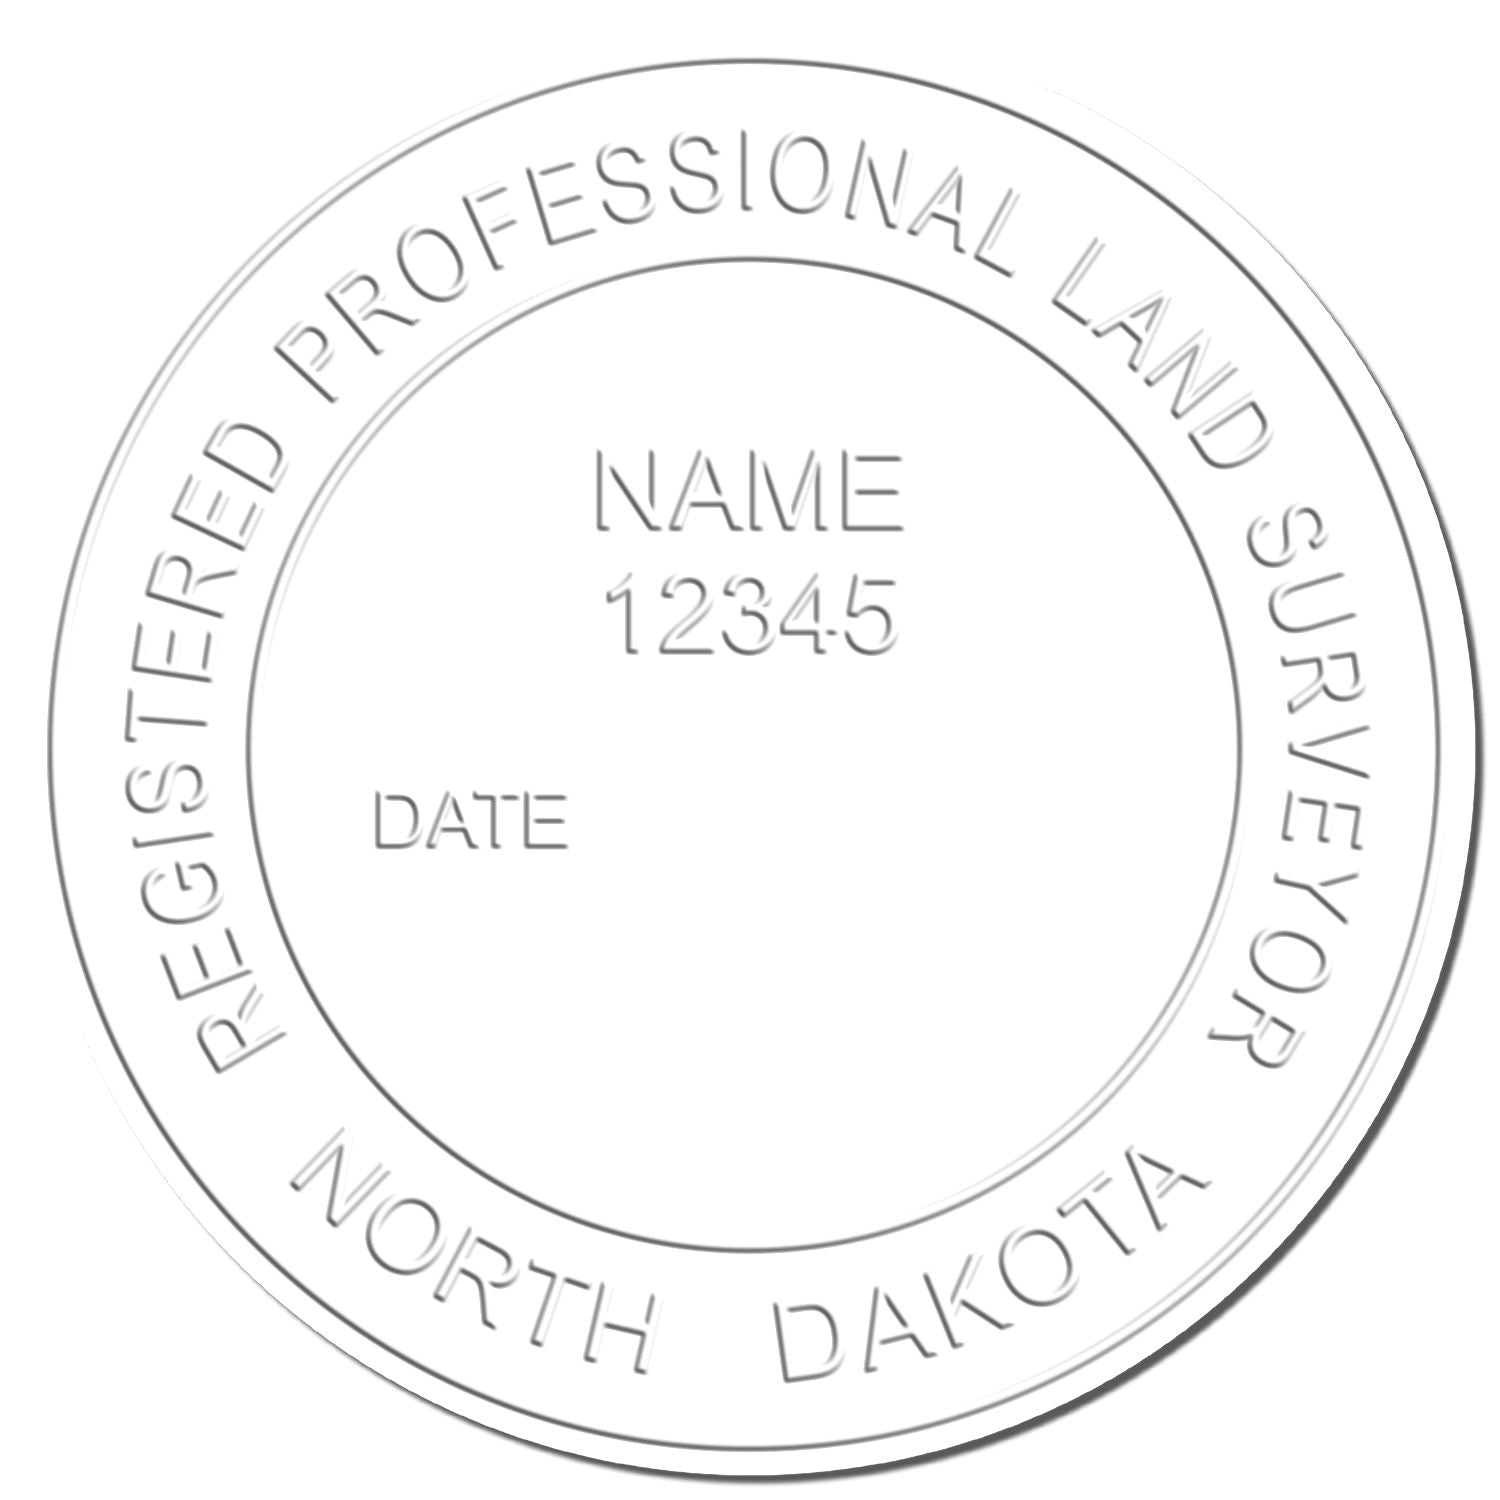 This paper is stamped with a sample imprint of the Long Reach North Dakota Land Surveyor Seal, signifying its quality and reliability.